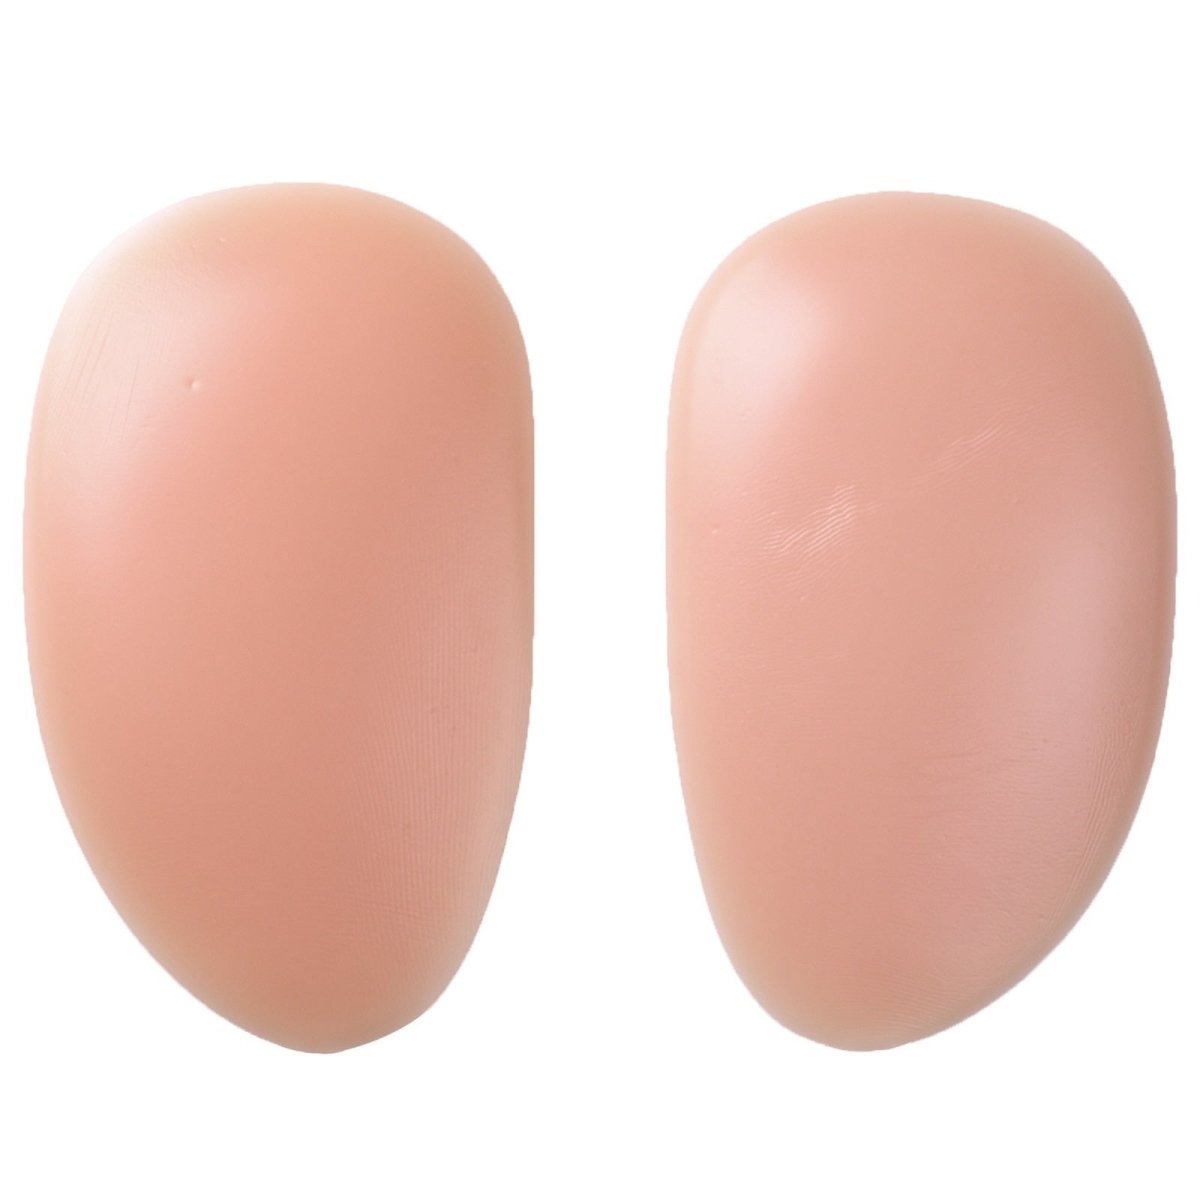 Silicone Hip Pads x2 - The Drag Queen Closet